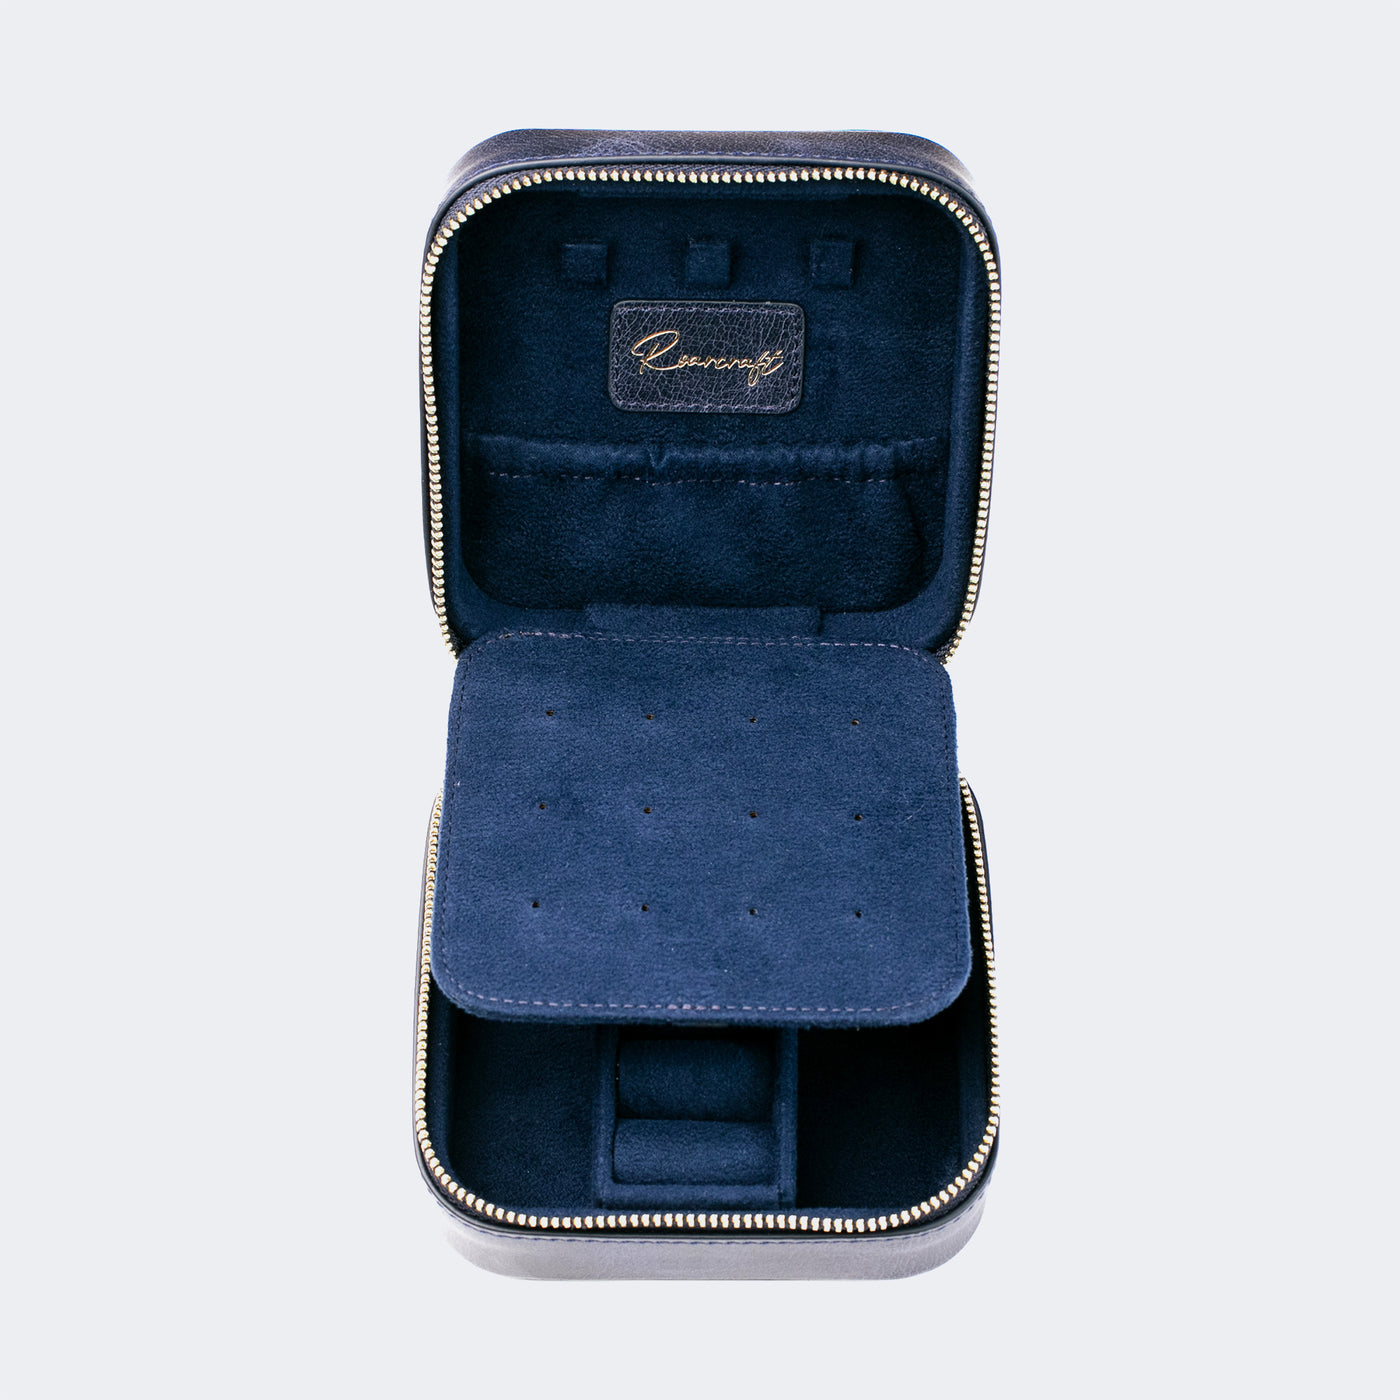 Leather Travel Jewelry Case - Blue